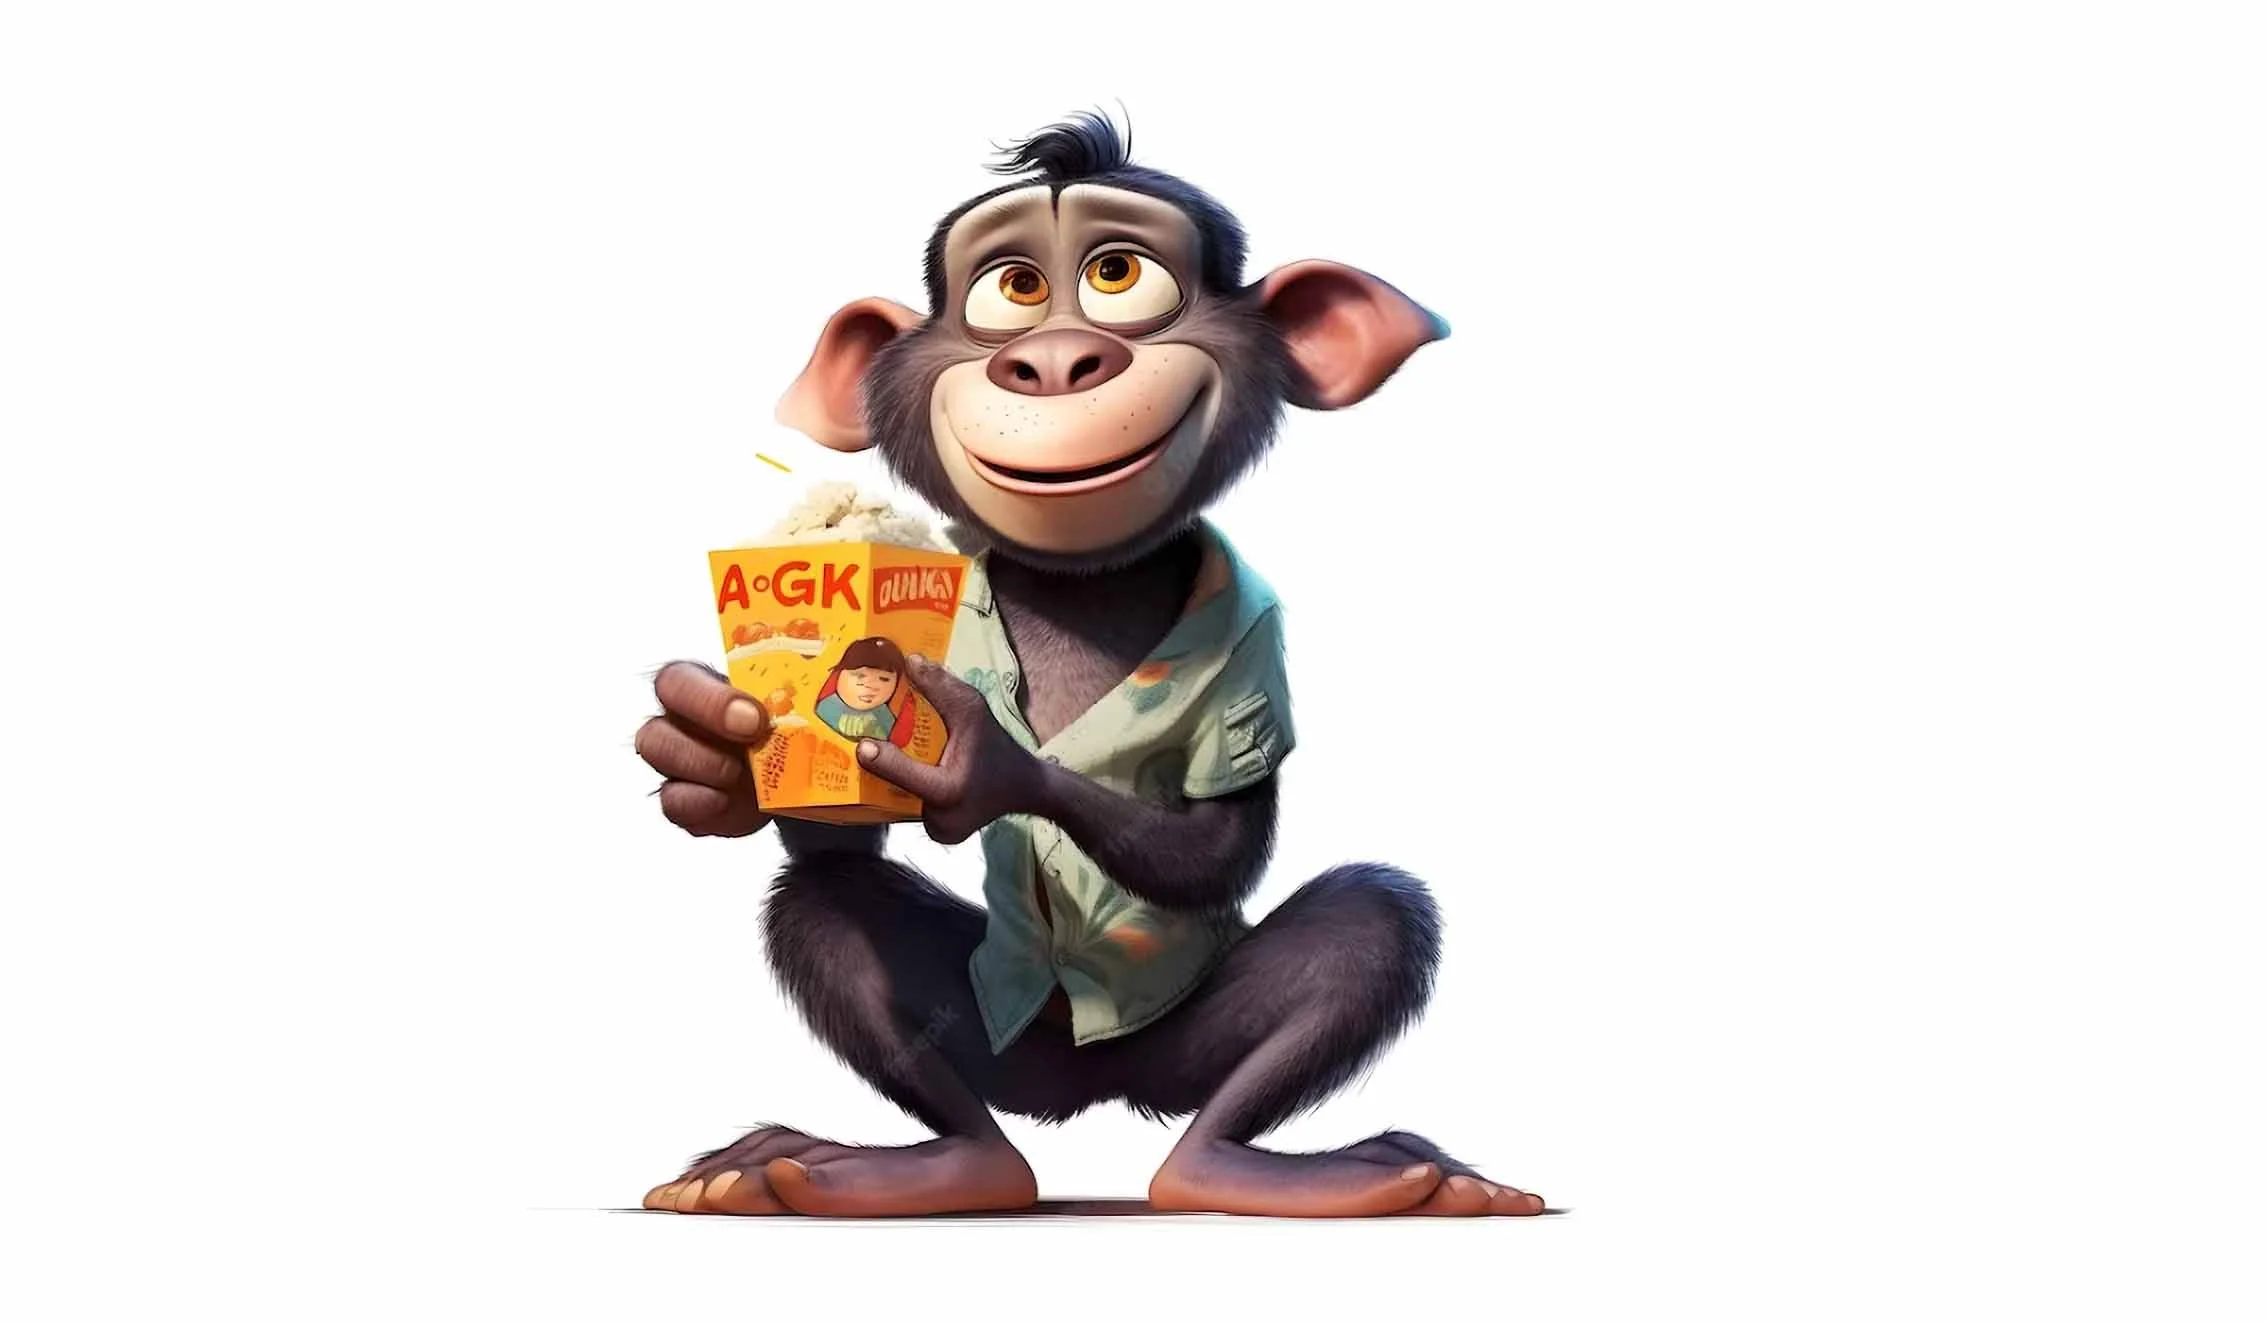 #1 result on Google while seaching Monkey Holding a Box in 2023